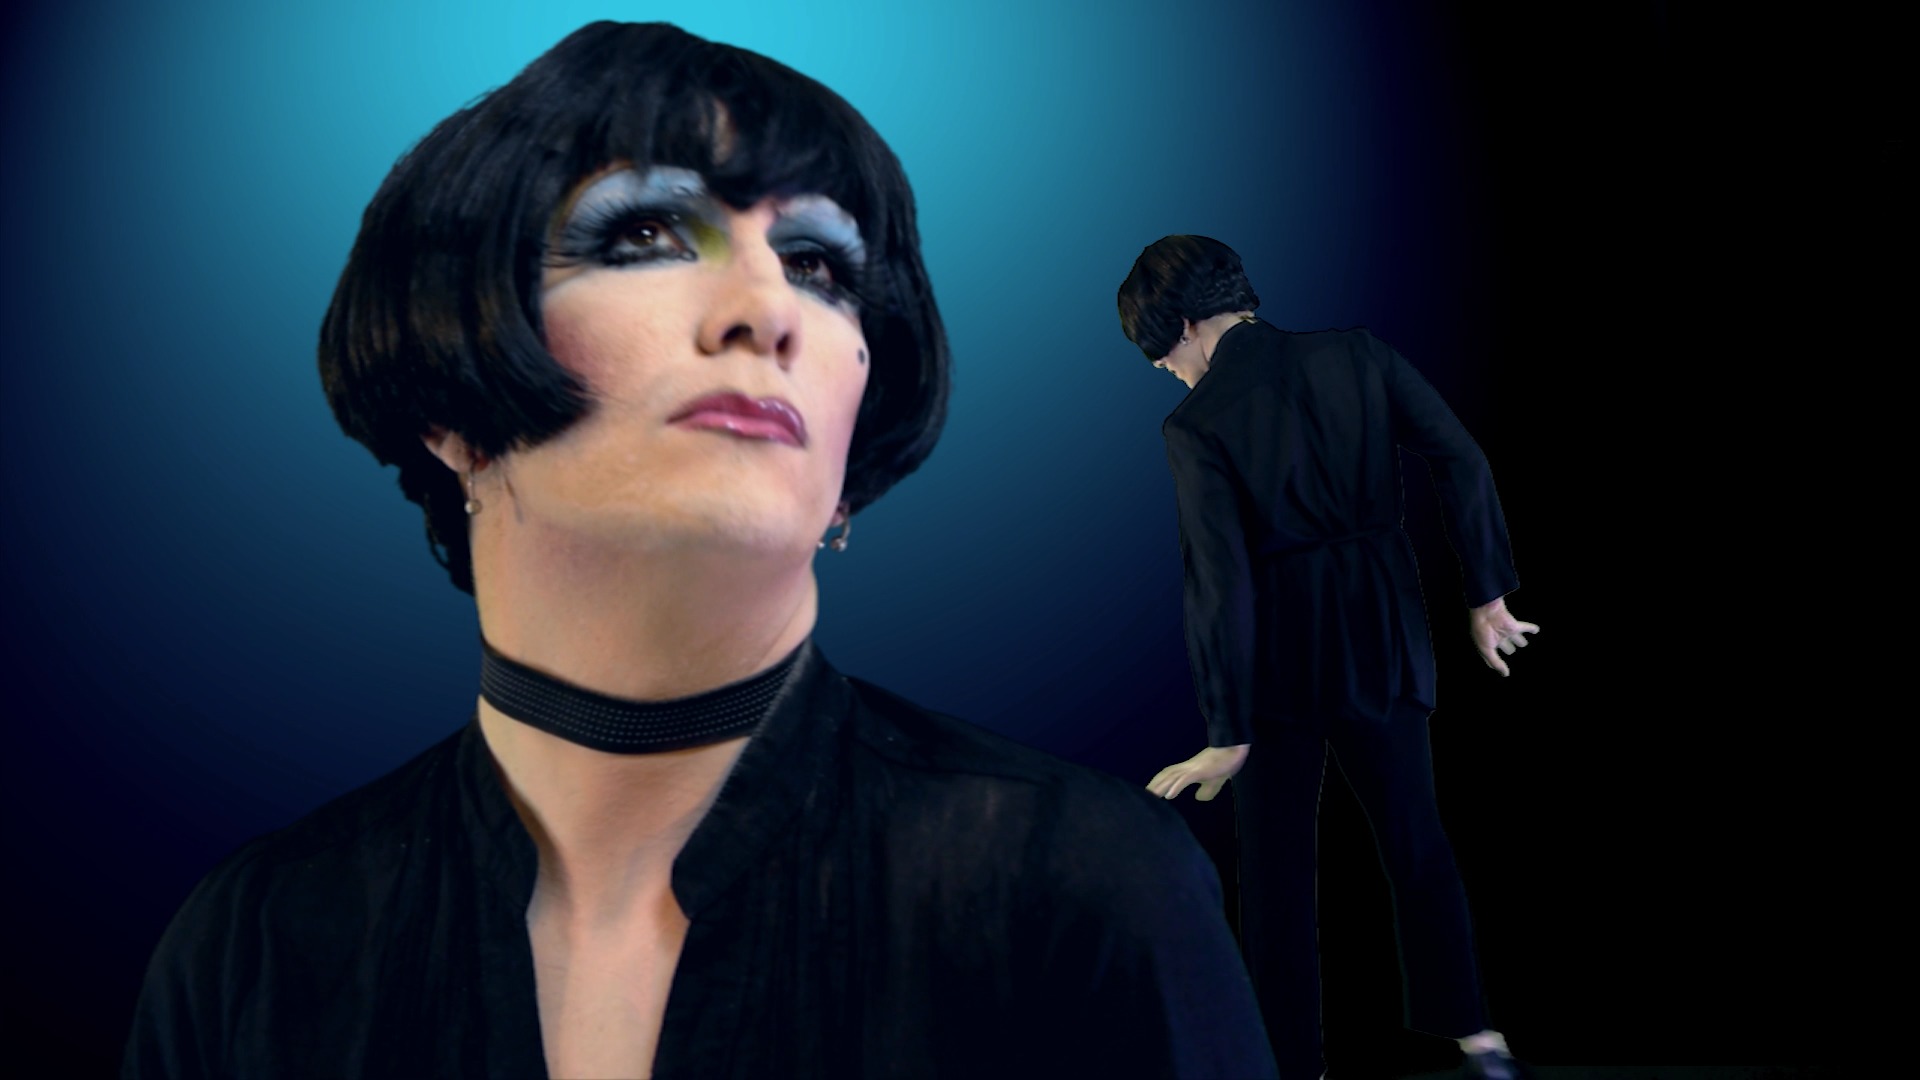 Saba as Liza Minnelli in A FRENCH GUY NAMED Saba episode 16. February 2014.